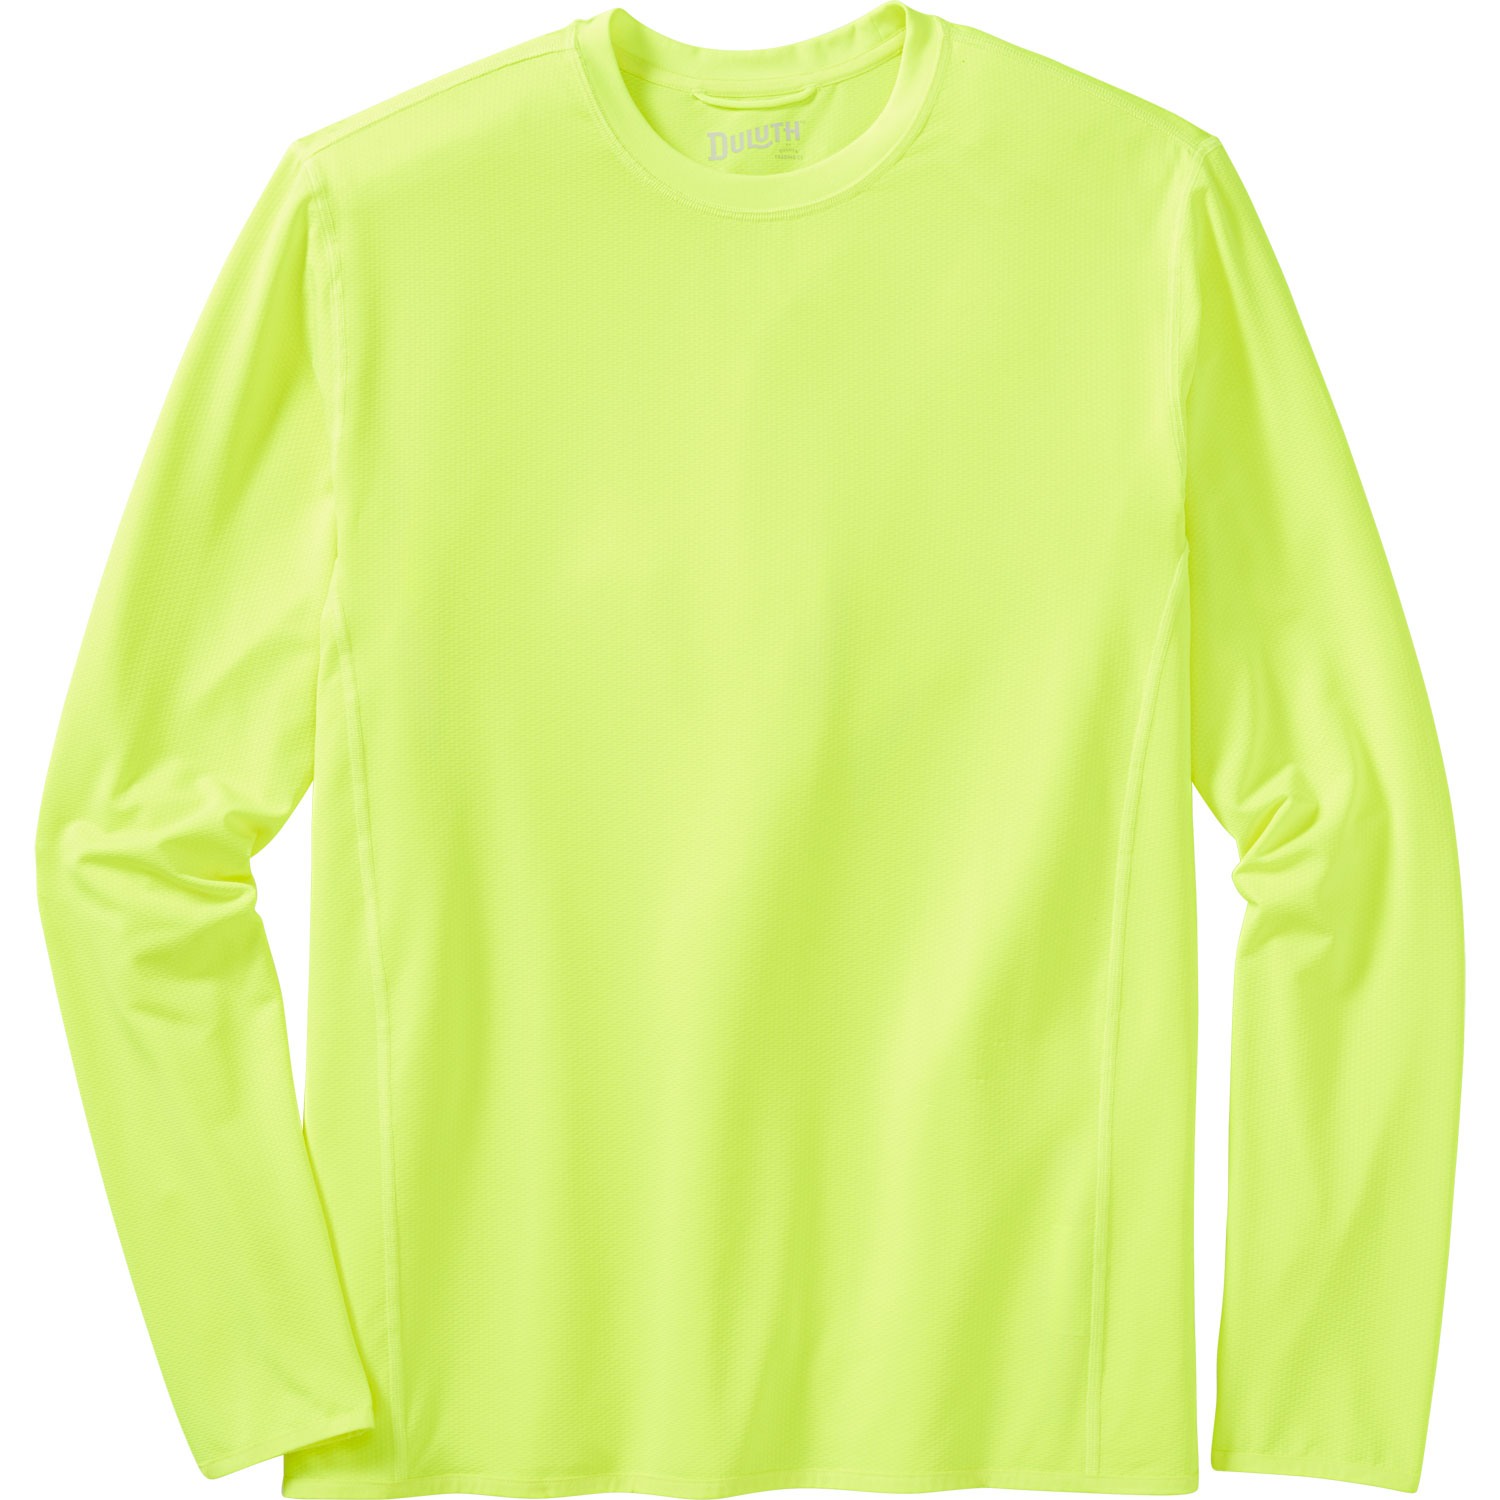 Men's Armachillo Sunperior UPF Standard Fit Long Sleeve Crew - Yellow/Gold 2XL - Duluth Trading Company